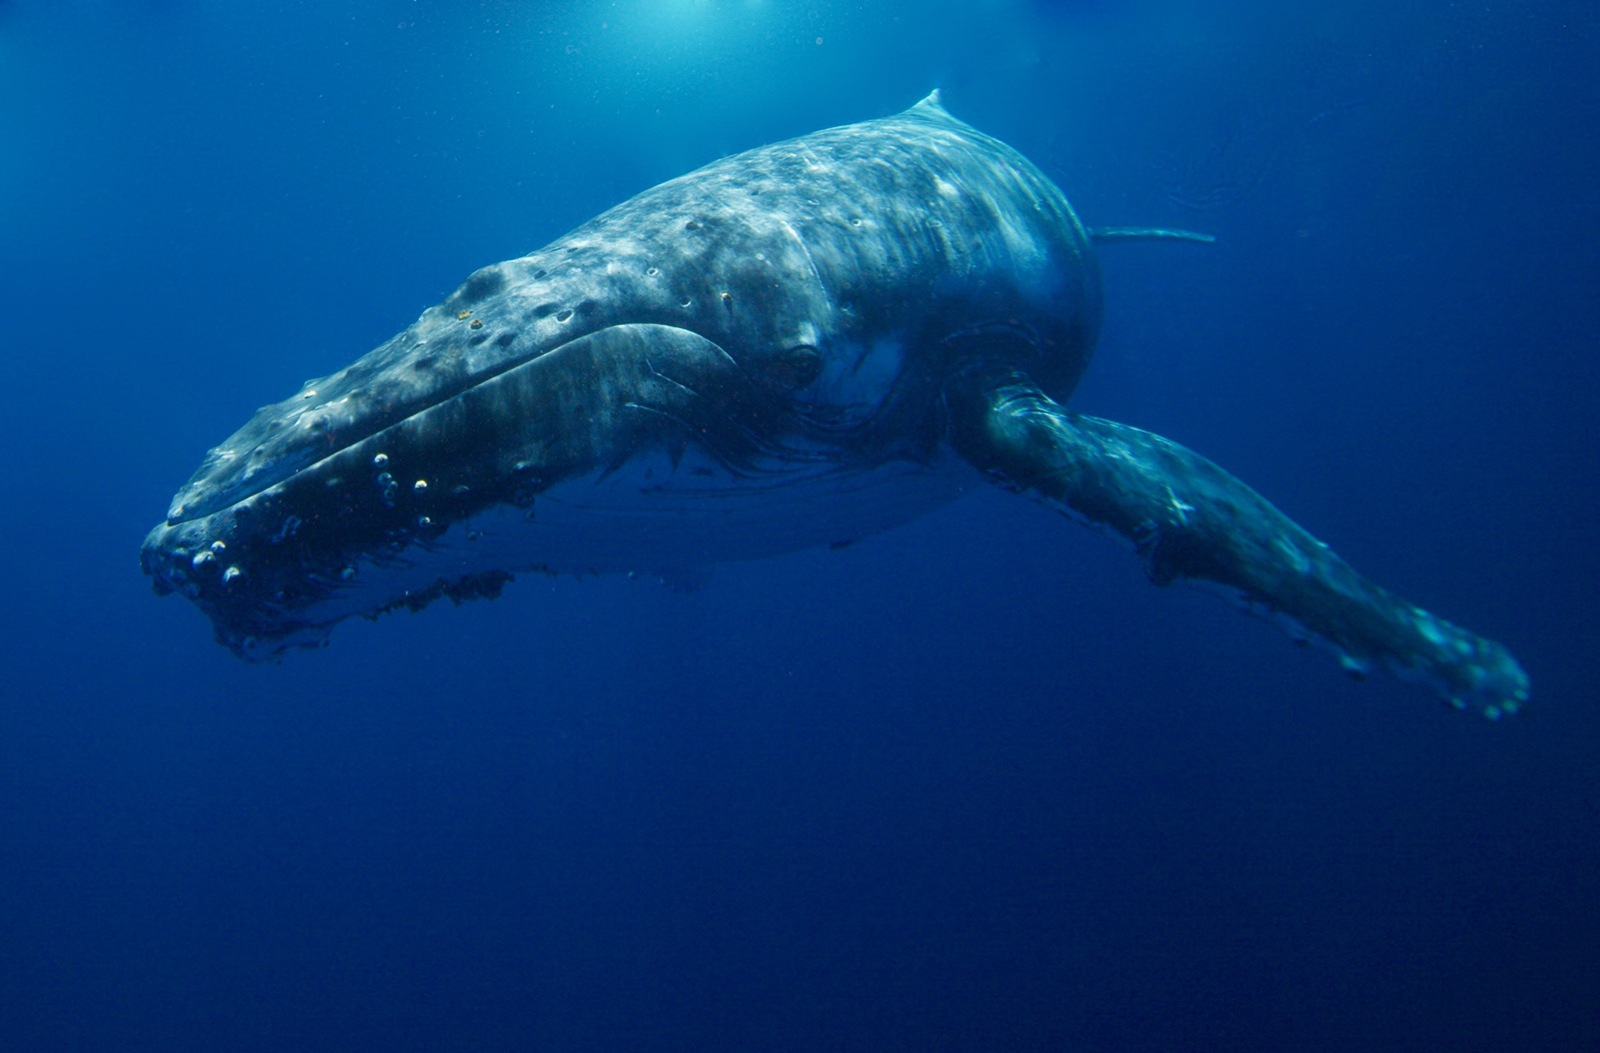 Tonga: The Swimming with Whales Experience